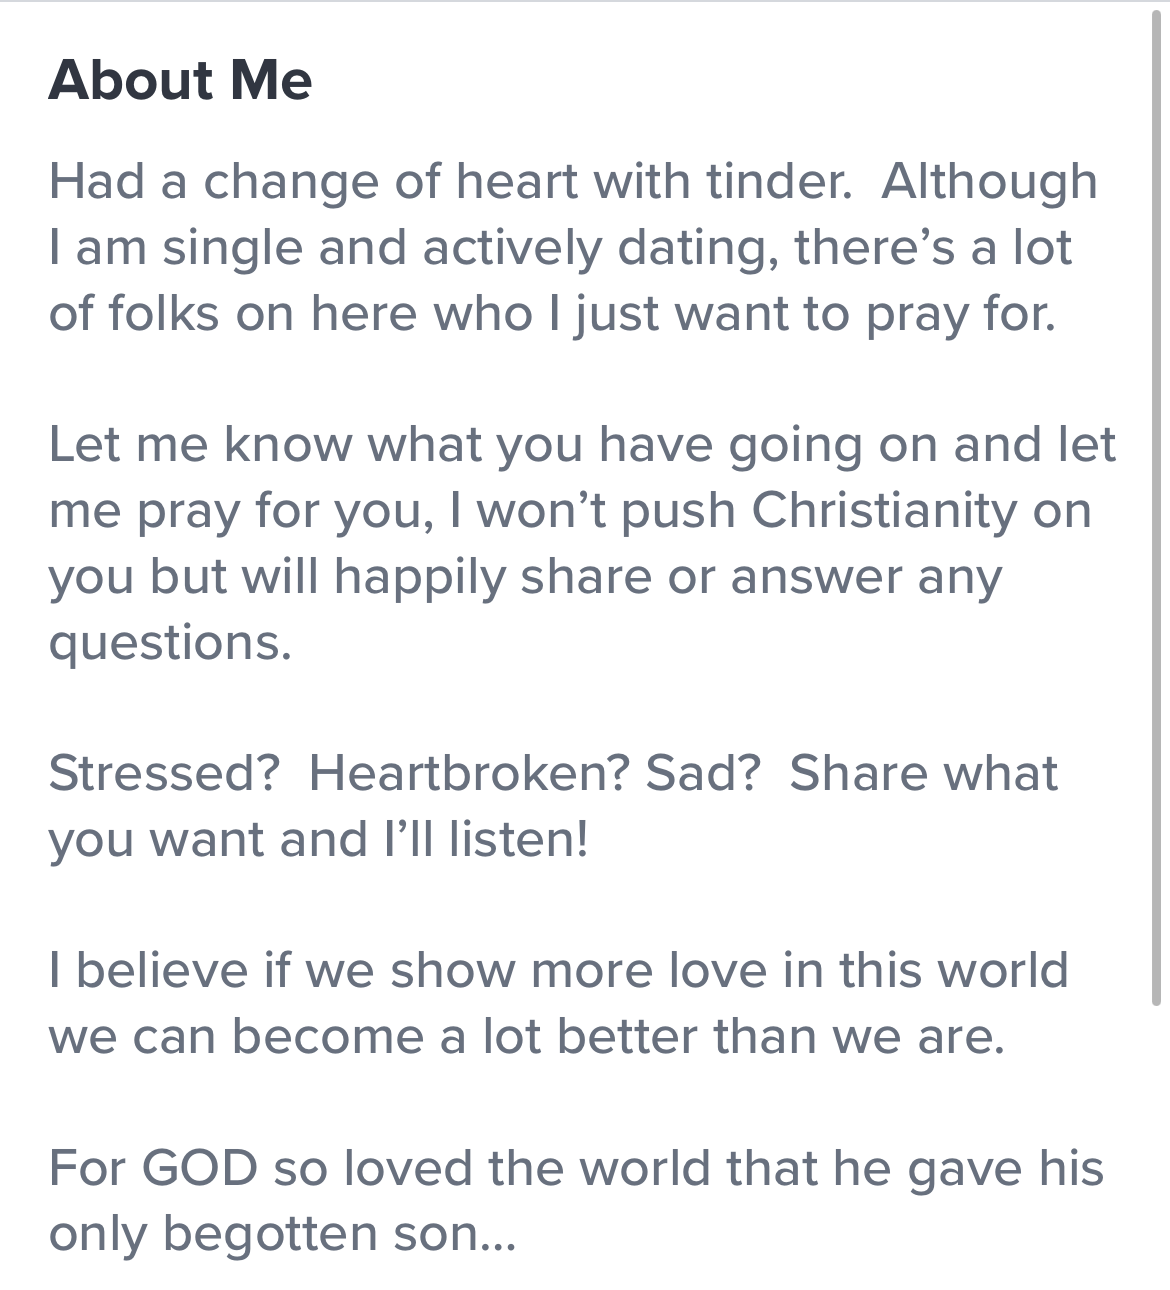 person saying they&#x27;ve had a change of heart with tinder but will be praying for people and can happily share or answer any questions. ends with a quote from the bible